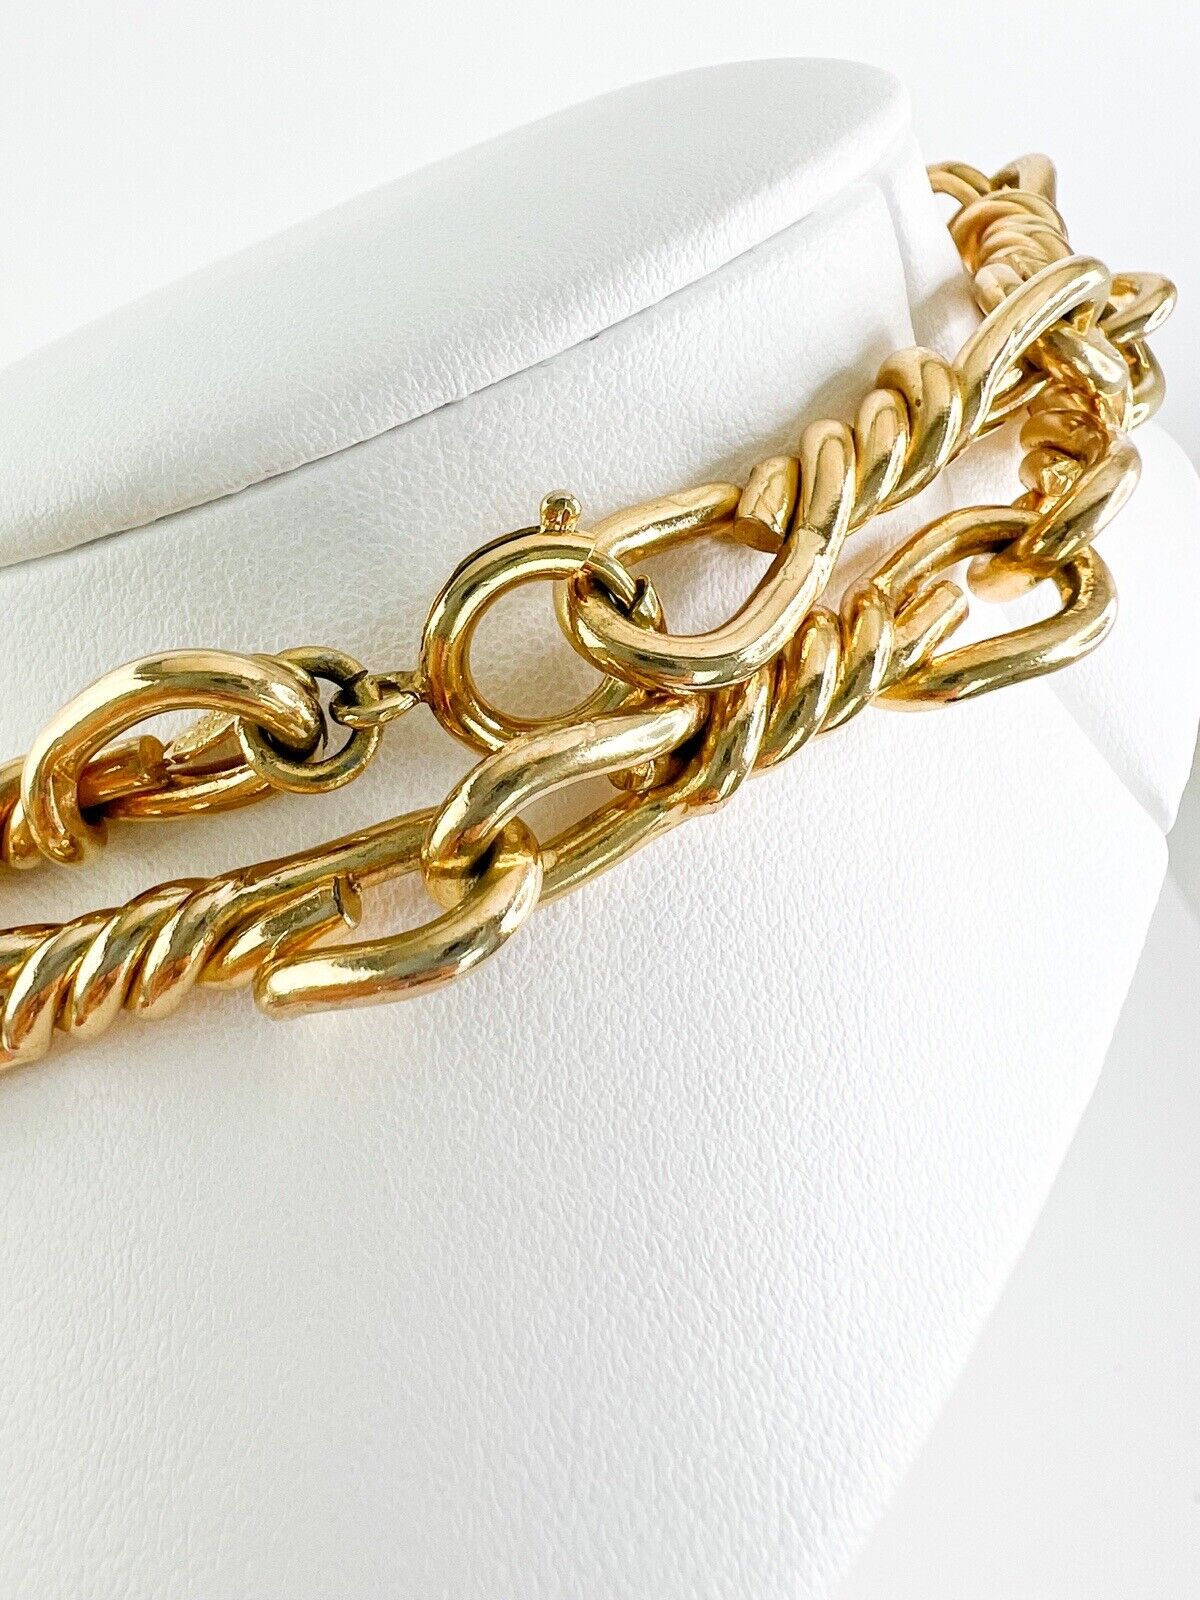 Christian Dior 1973 Gold Tone Chain Necklace Vintage